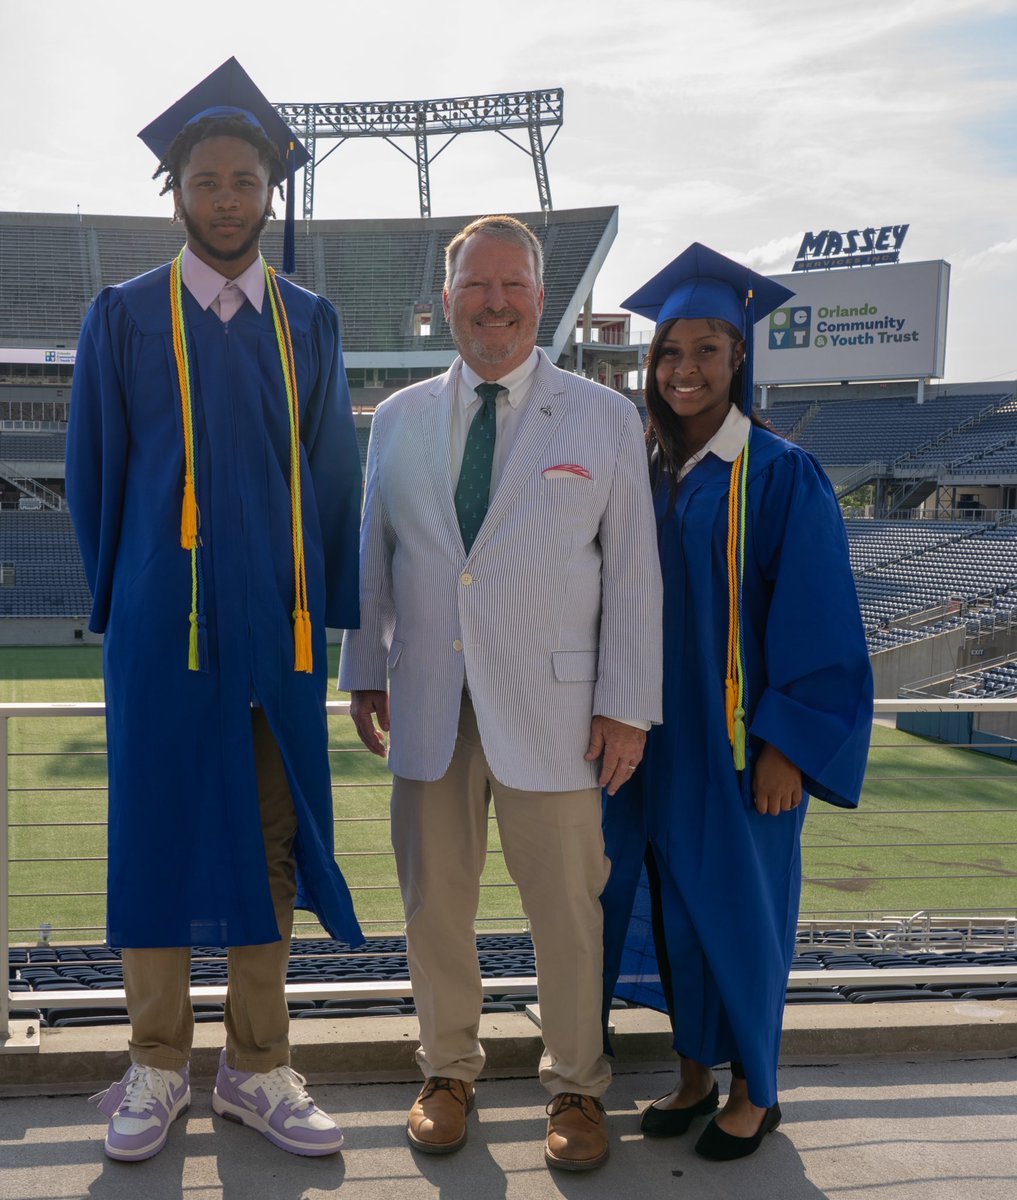 By investing in our @orlandoFPR programs, our community invests in young residents like Traniya and Keishaun. After graduating from Jones in a few days, Traniya will study biomedical science at UCF, while Keishaun will focus on sports management at University of North Florida.